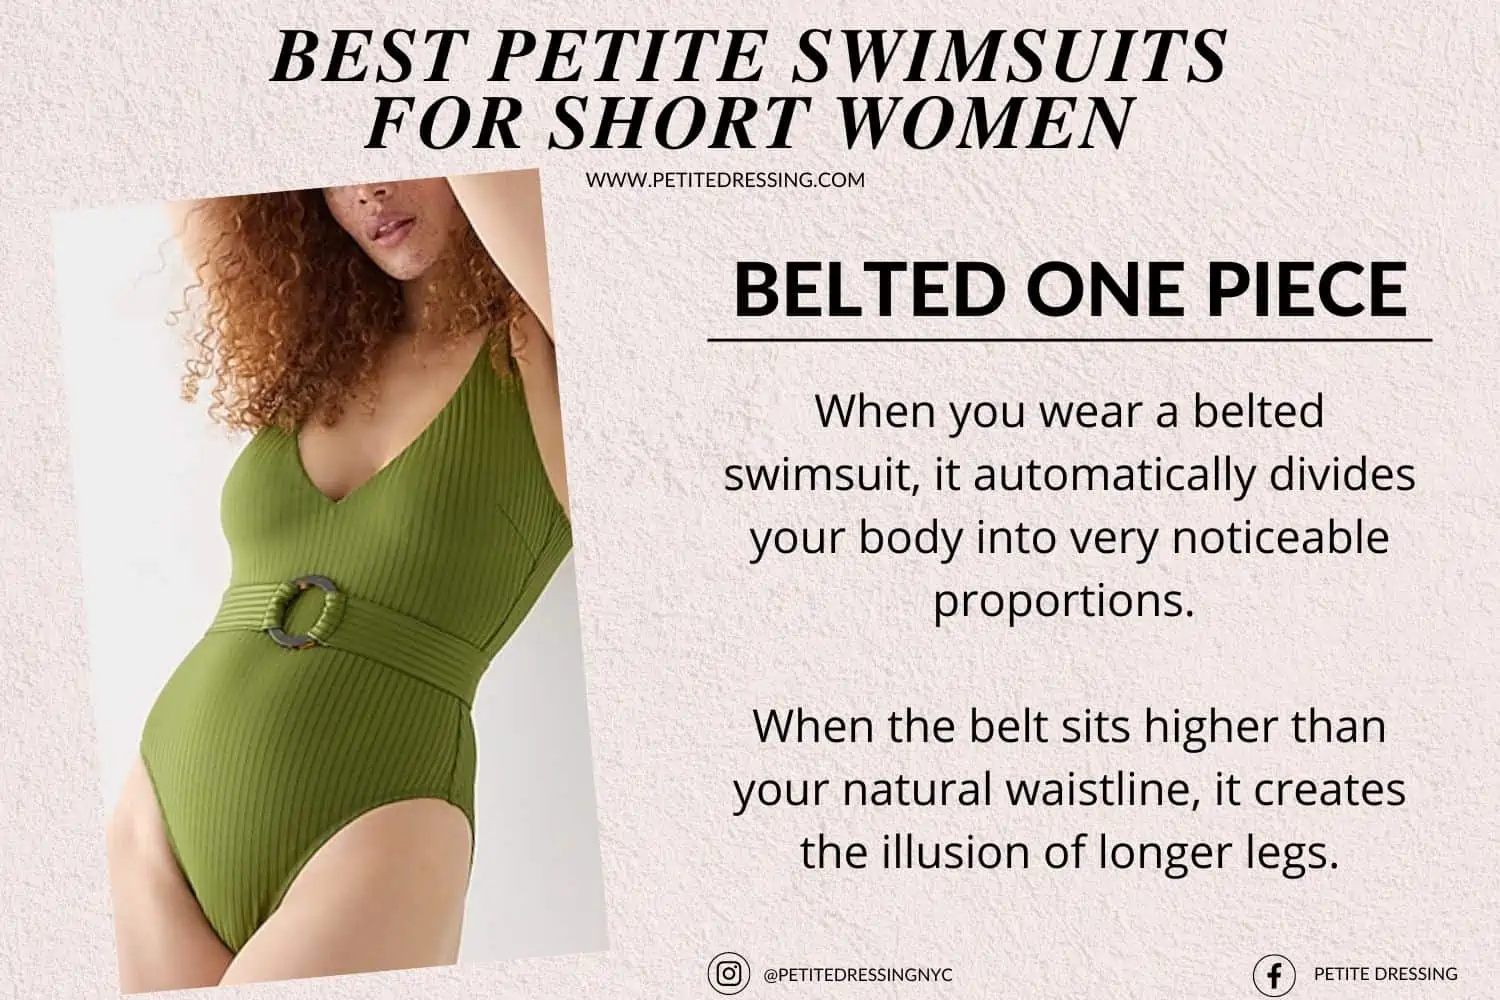 The Most Flattering Swimsuit Style For Petite Pinays, According To